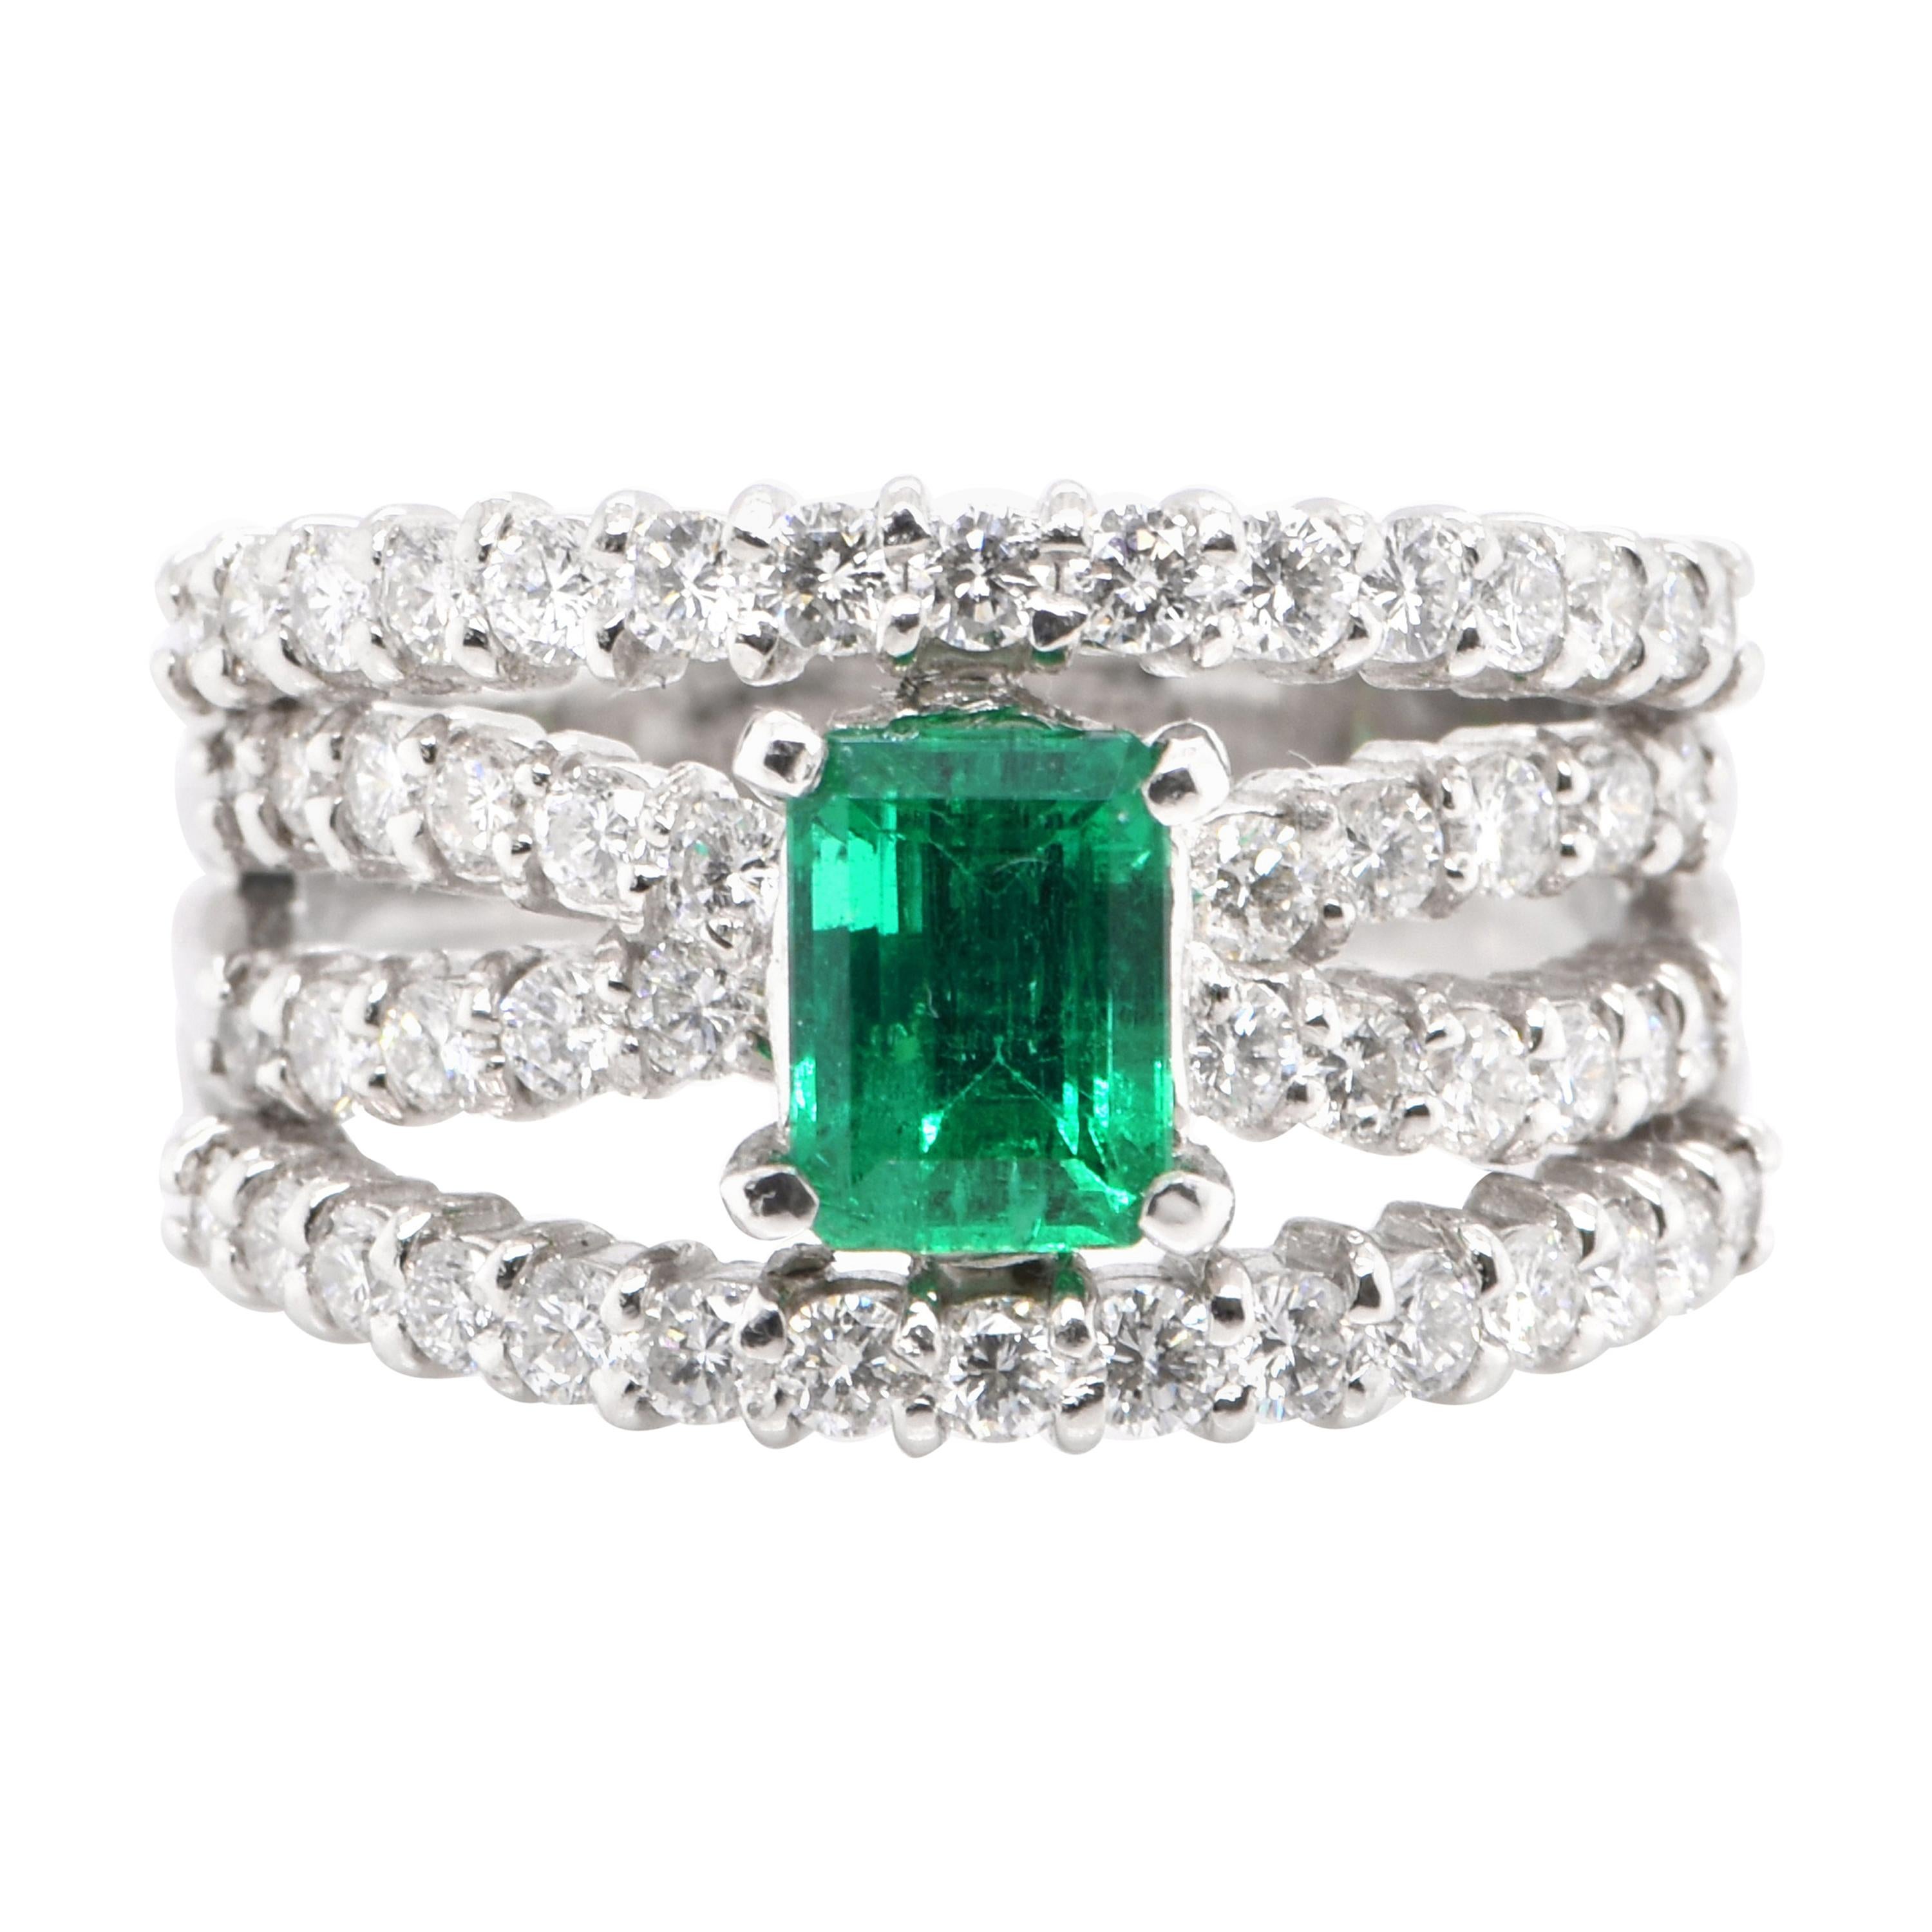 0.93 Carat, Natural, Colombian Emerald and Diamond Ring Set in Platinum